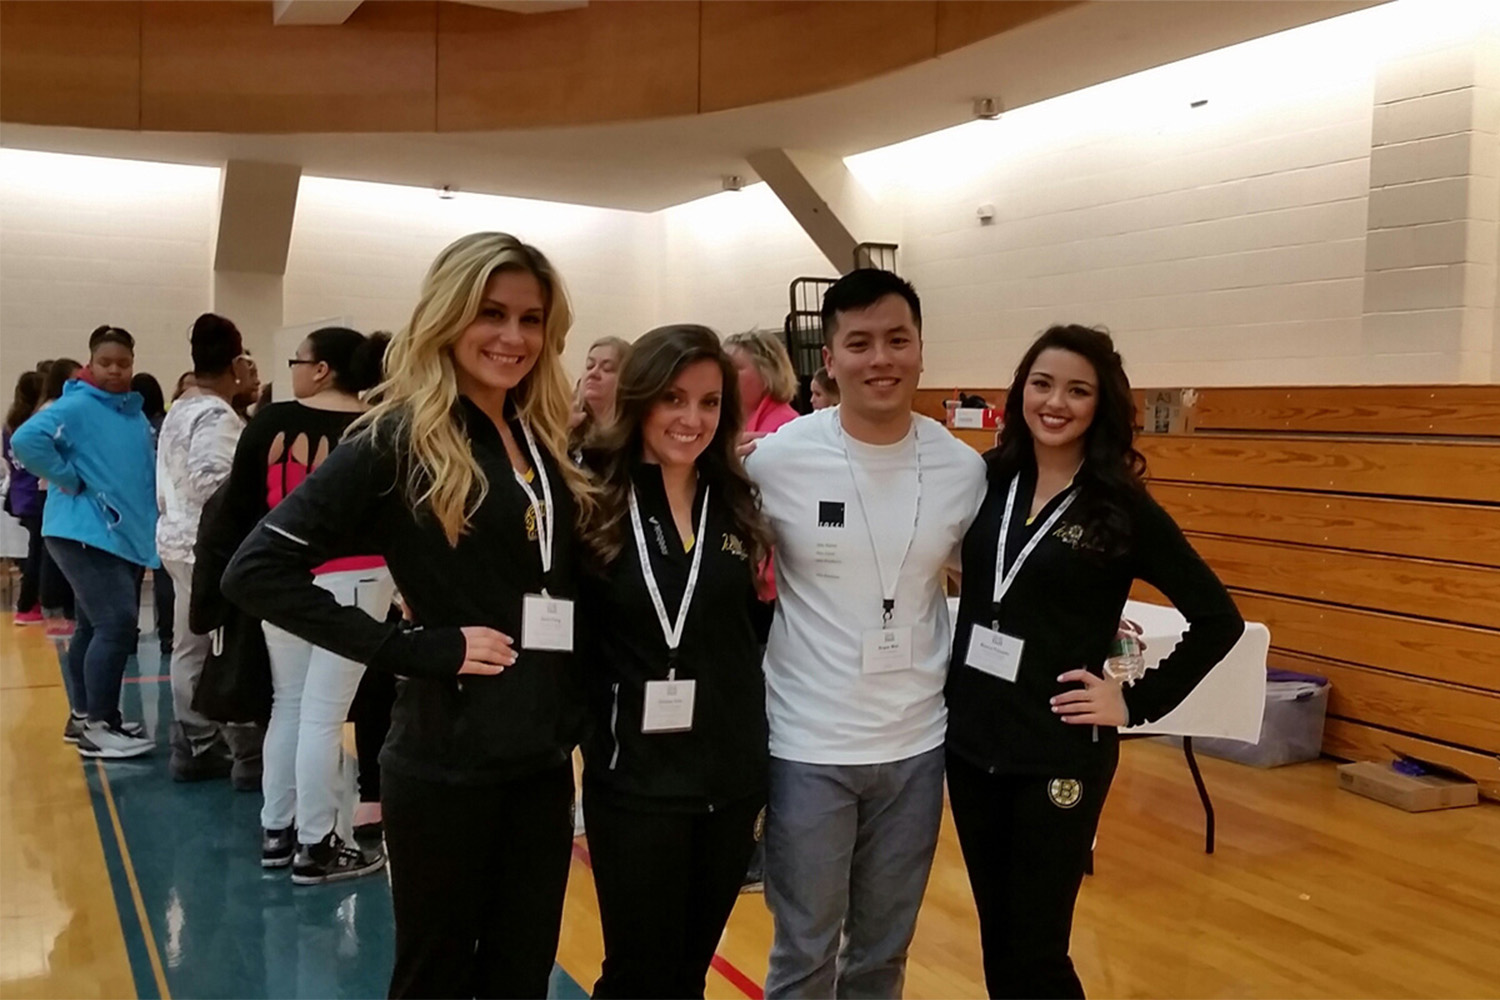 Bryan taking a photo with some of the Bruins Ice Girls who were also there volunteering